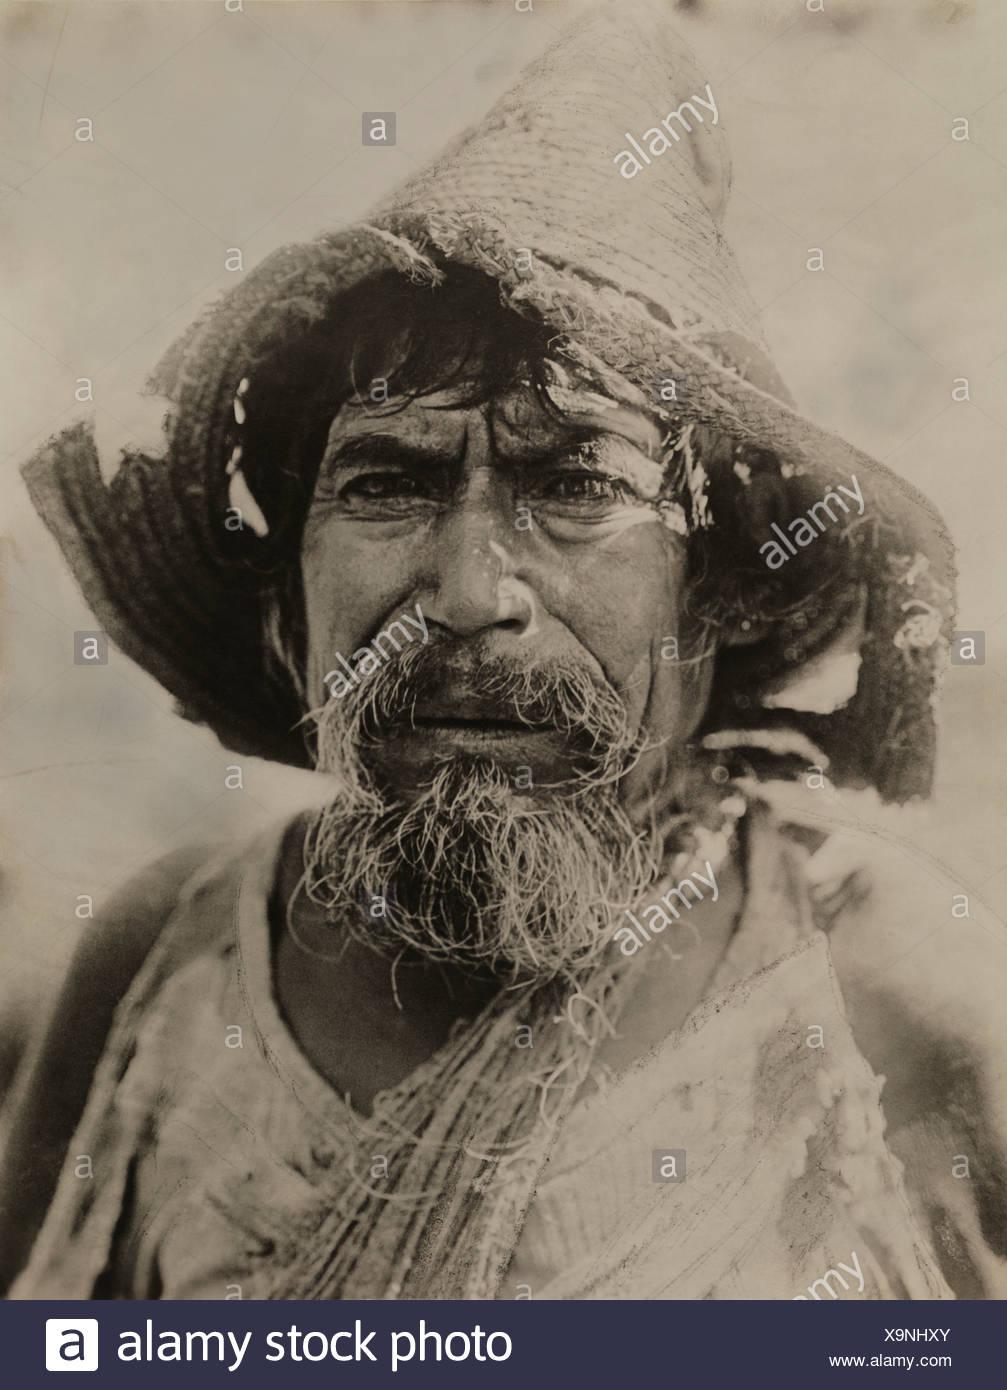 Portrait of a working-class Costa Rican man, his hat worn through ...